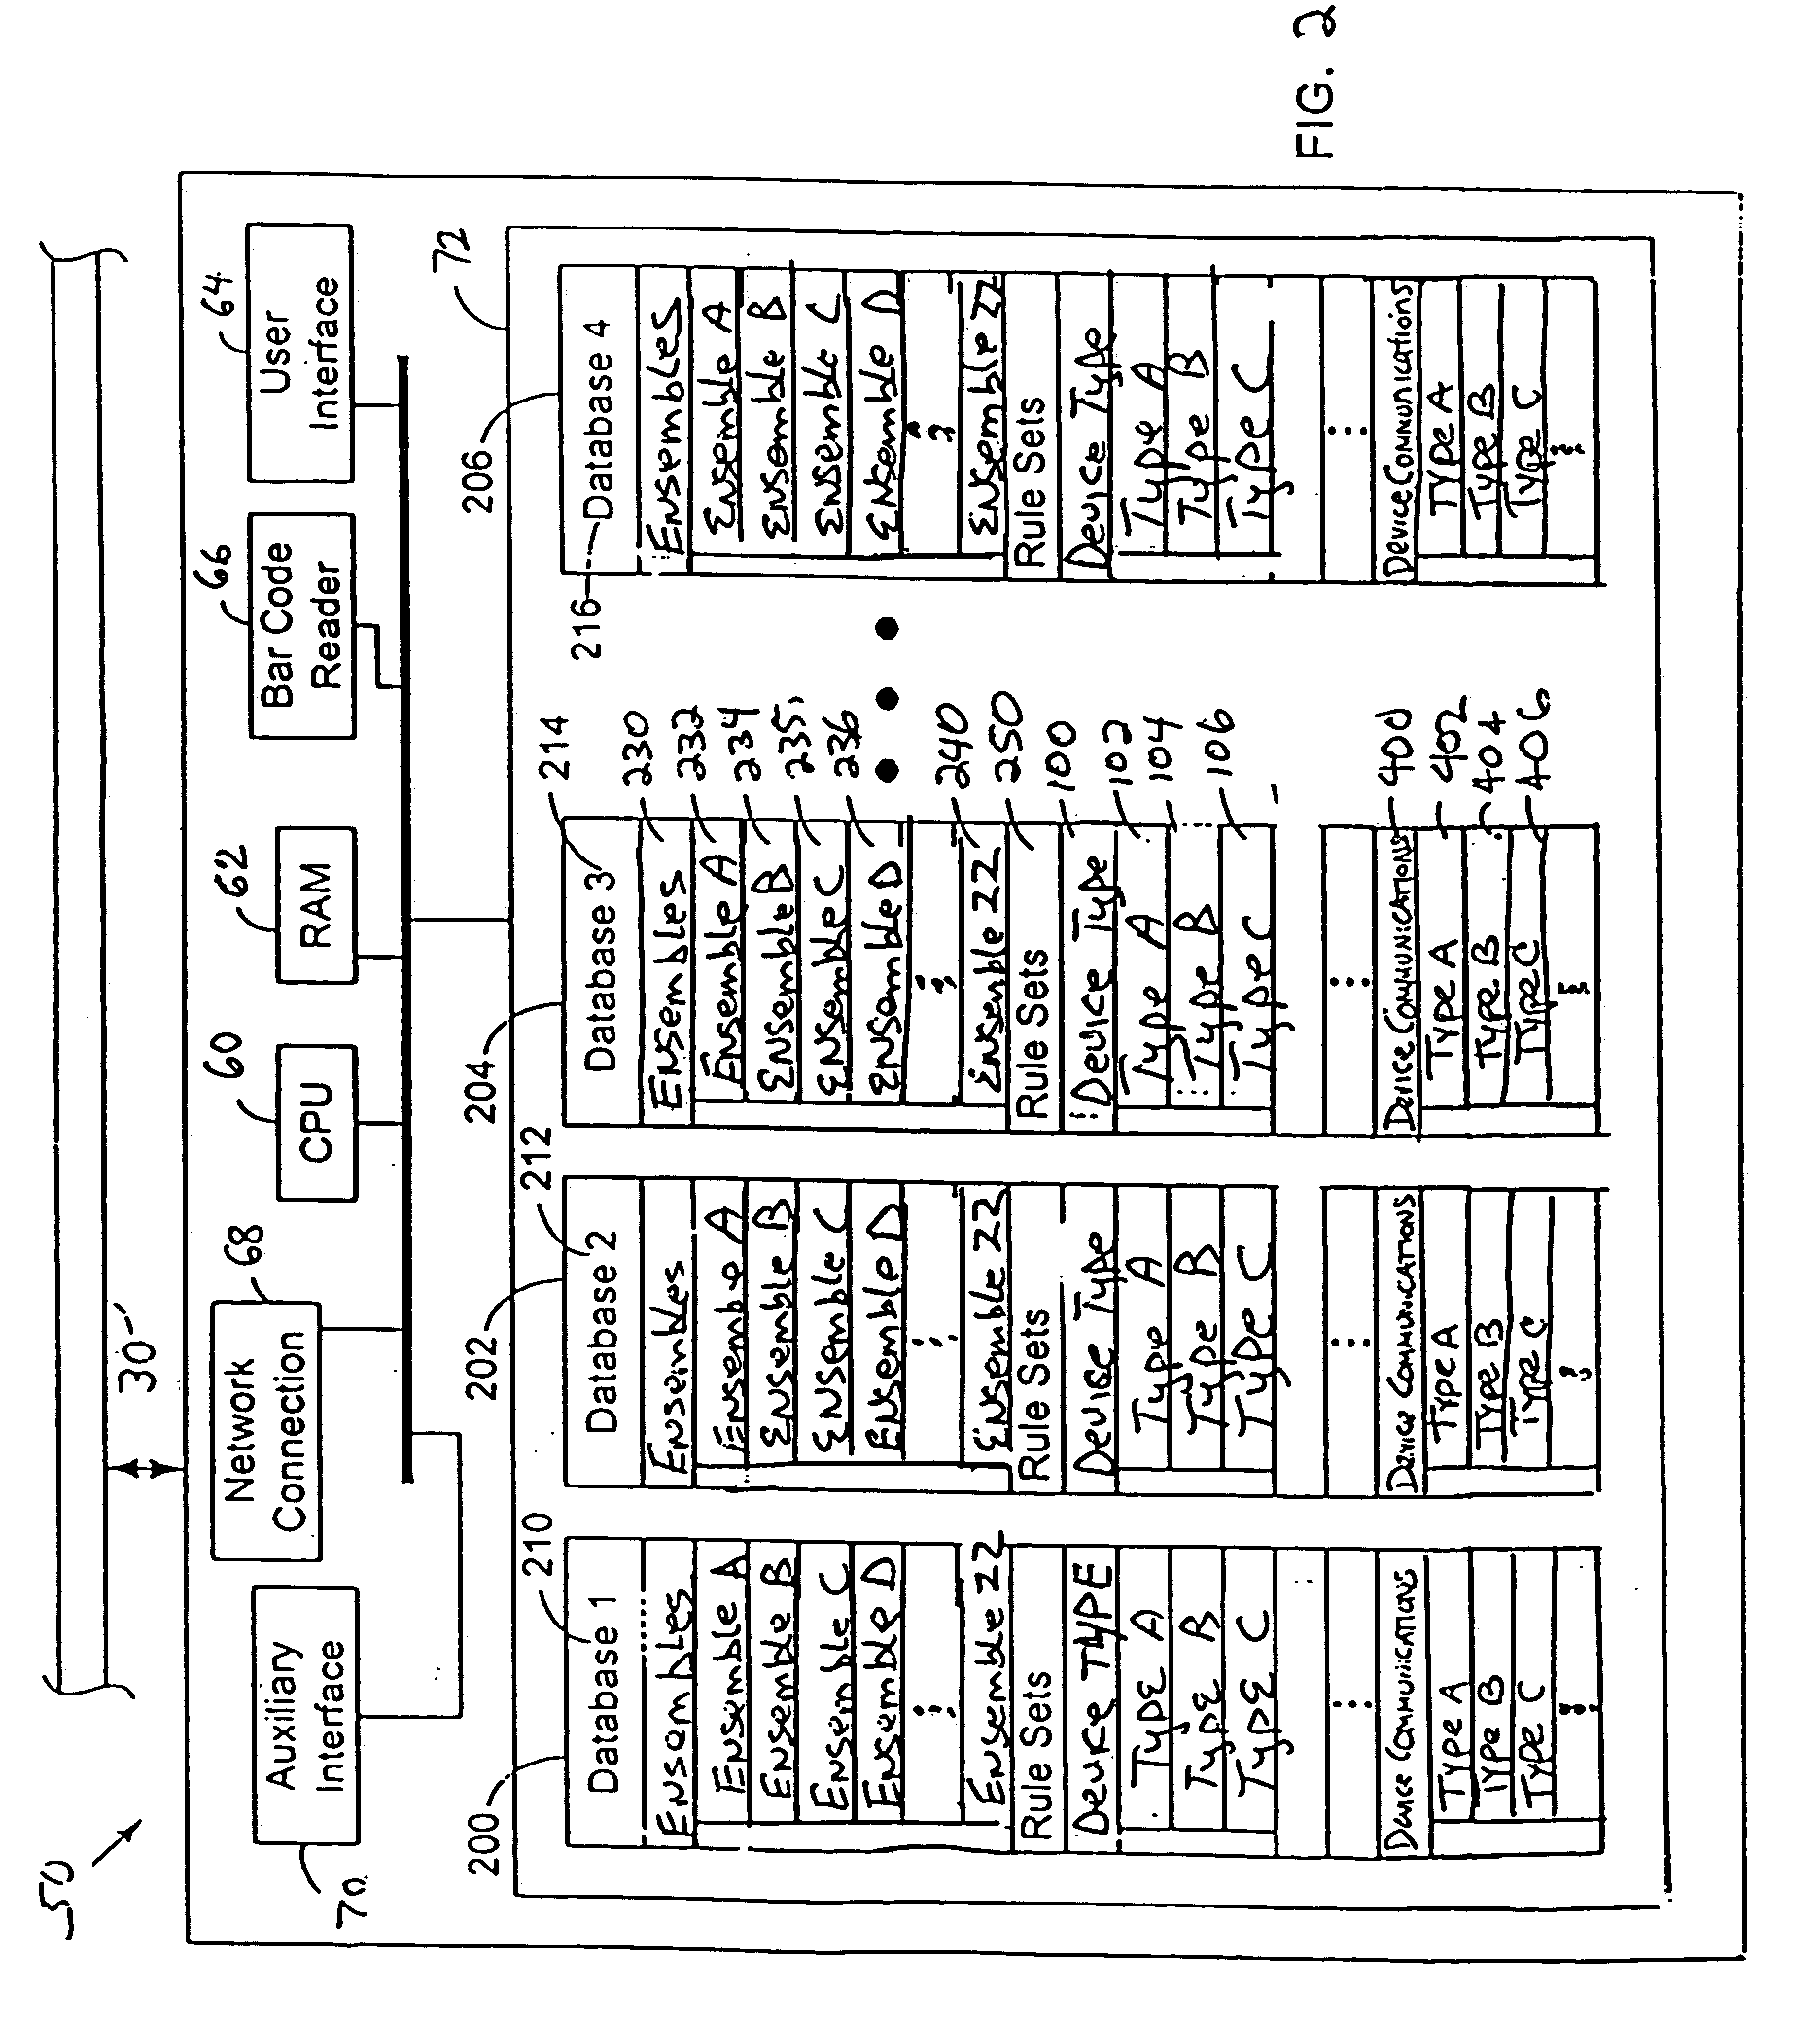 System and method for managing medical databases for patient care devices